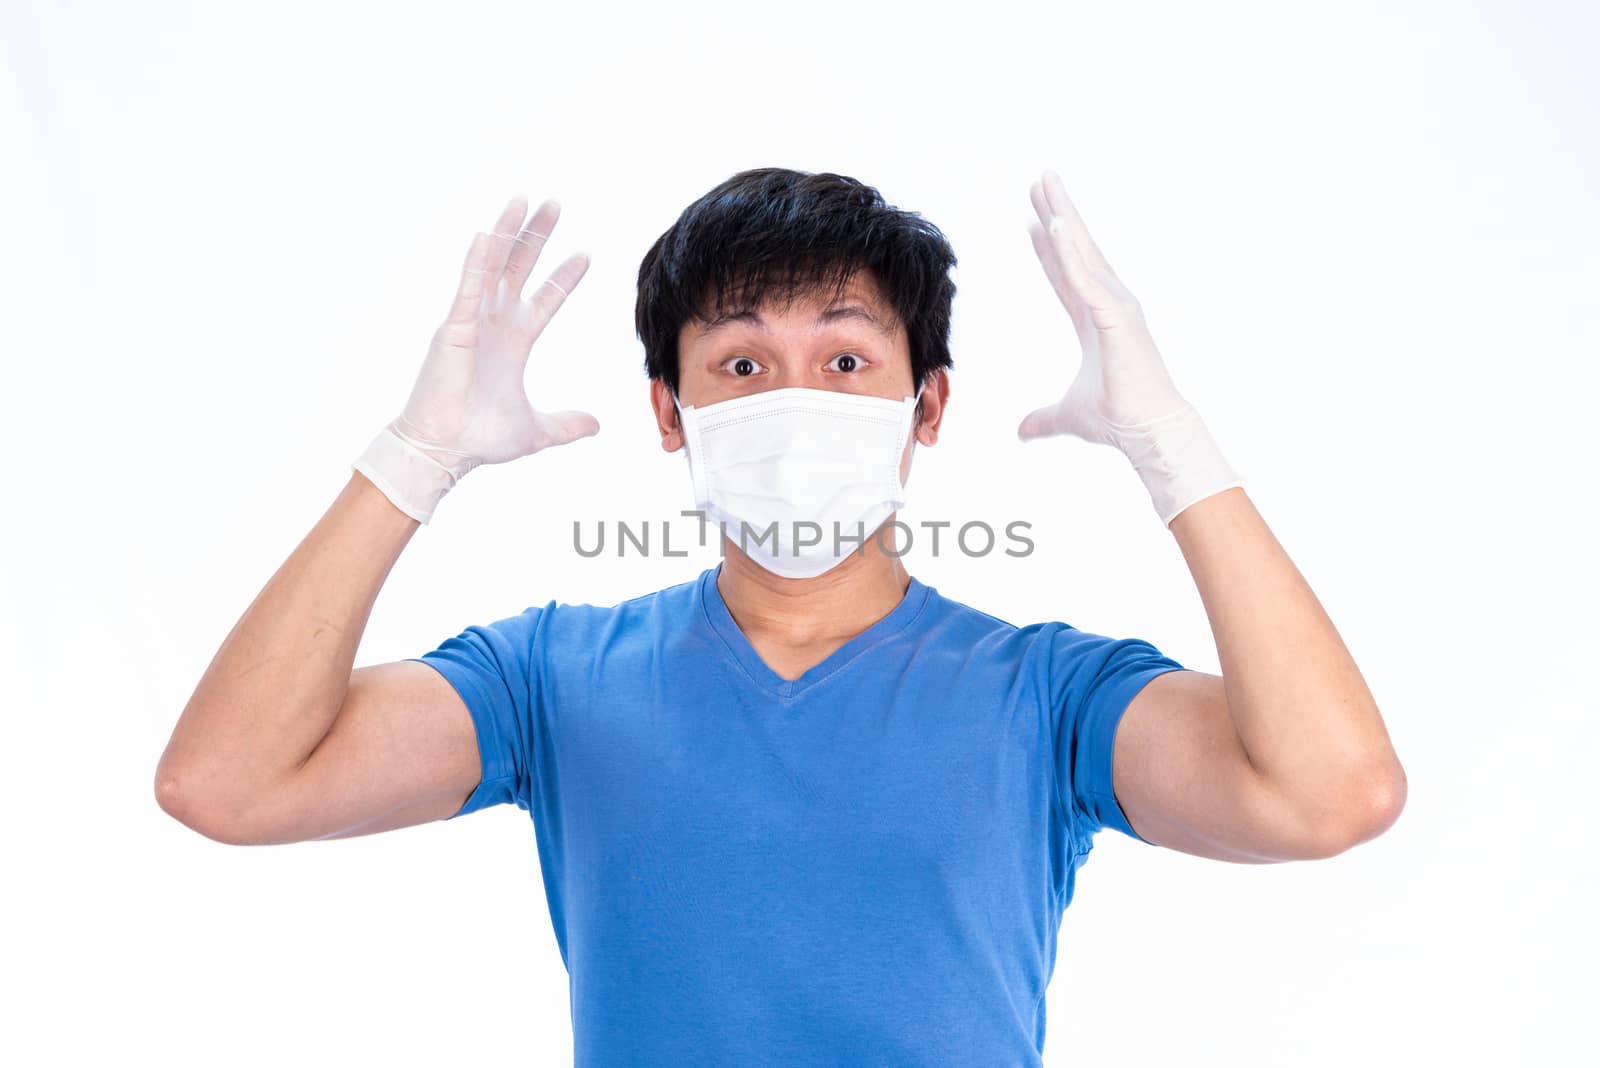 Asian young man in blue t-shirt top with medical mask and latex gloves to protect COVID-19 with isolated on white background concept.